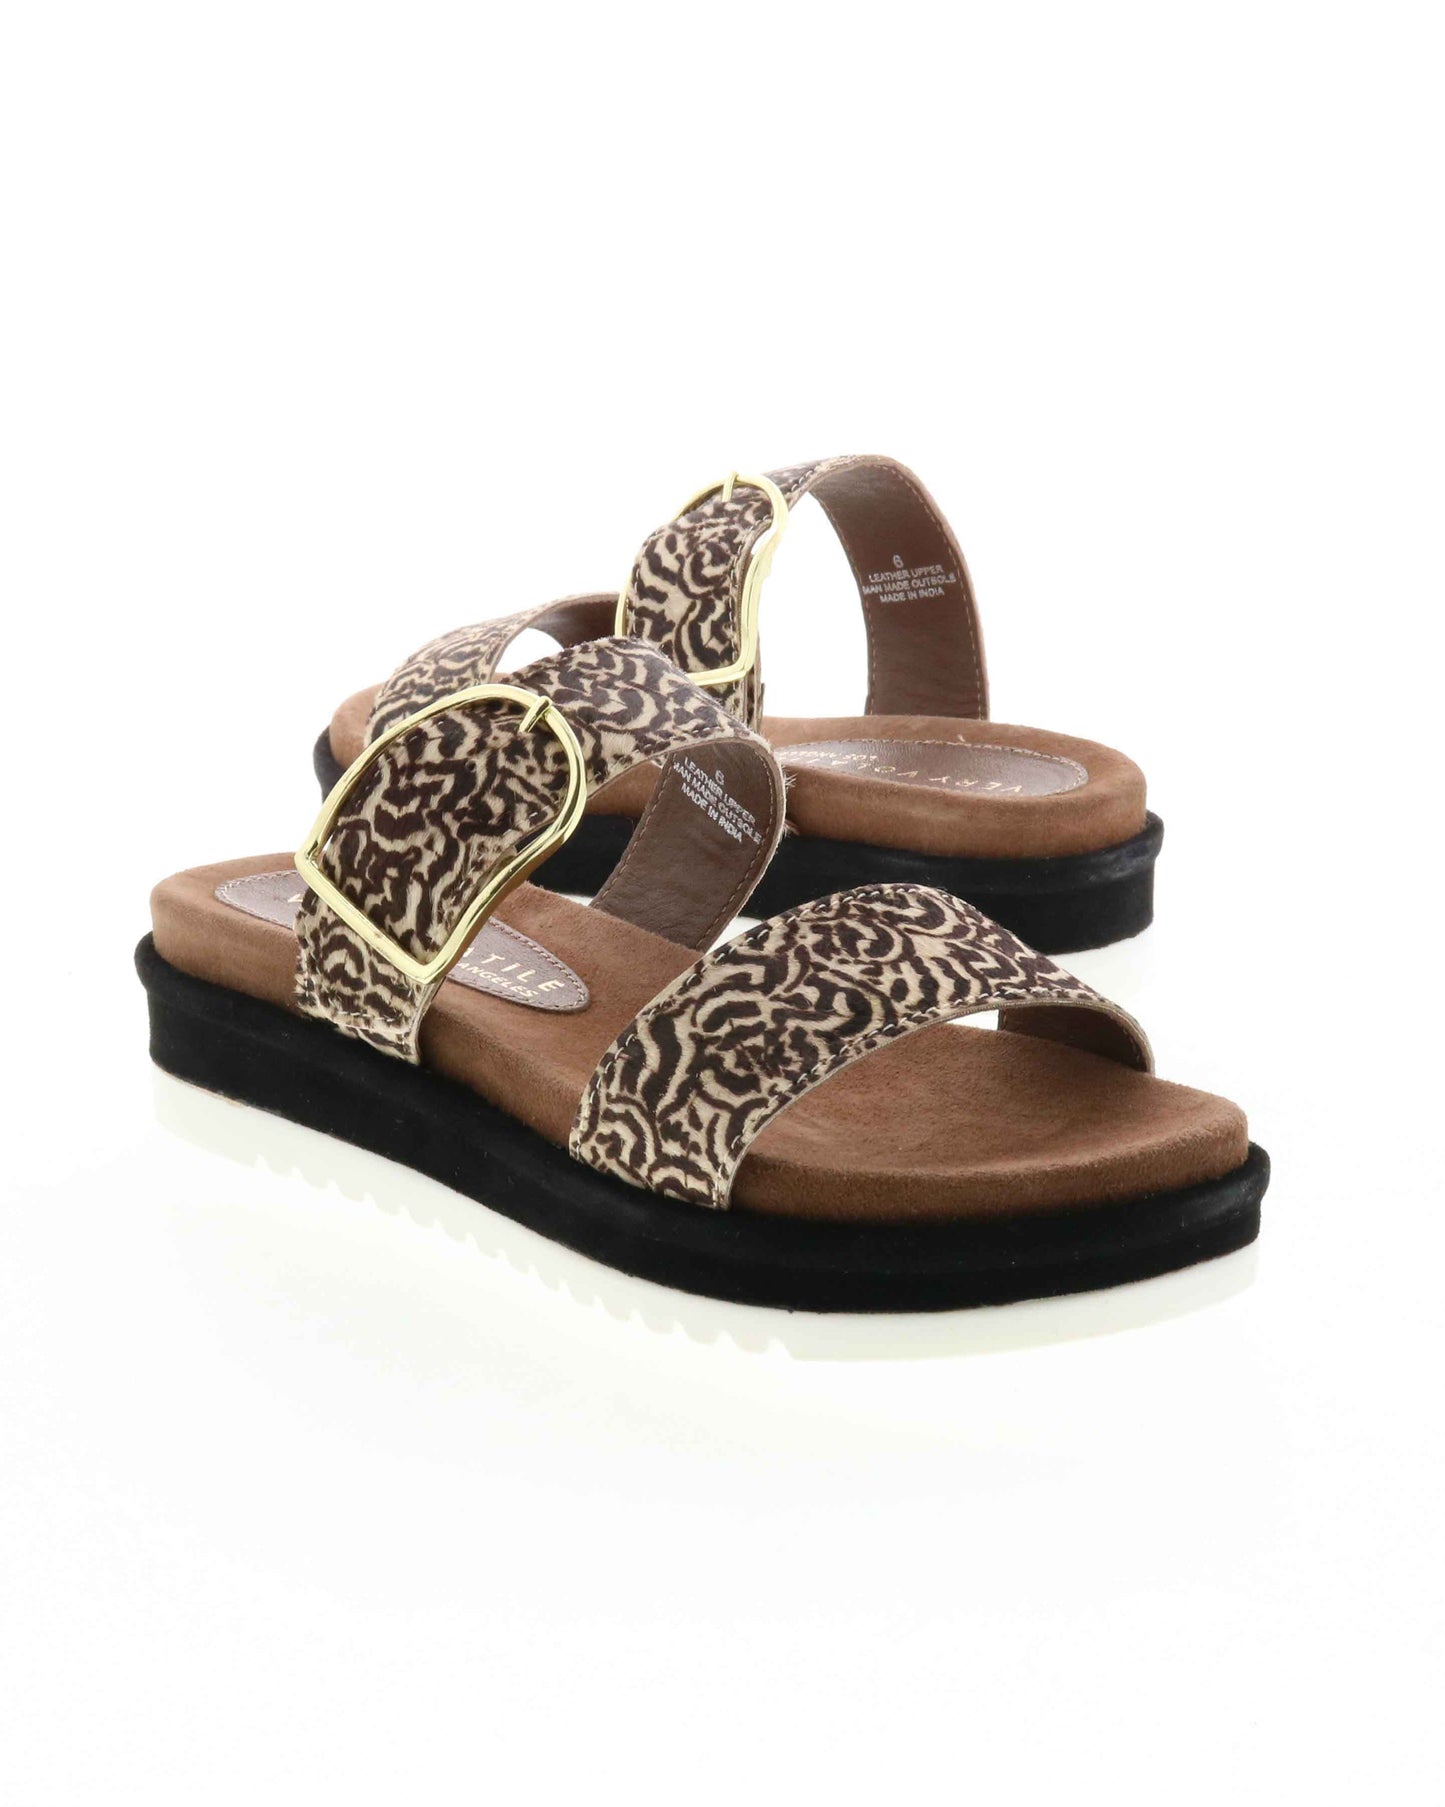 DOUBLE STRAP MINI FLATFORM SANDAL - Genuine calf-hair upper - Leather lining - Adjustable metal buckle - Two band slip-on sandal style - Anatomic suede covered footbed - Suede covered low platform bottom - White ridged outsole - Approx. 1.5" heel height 2